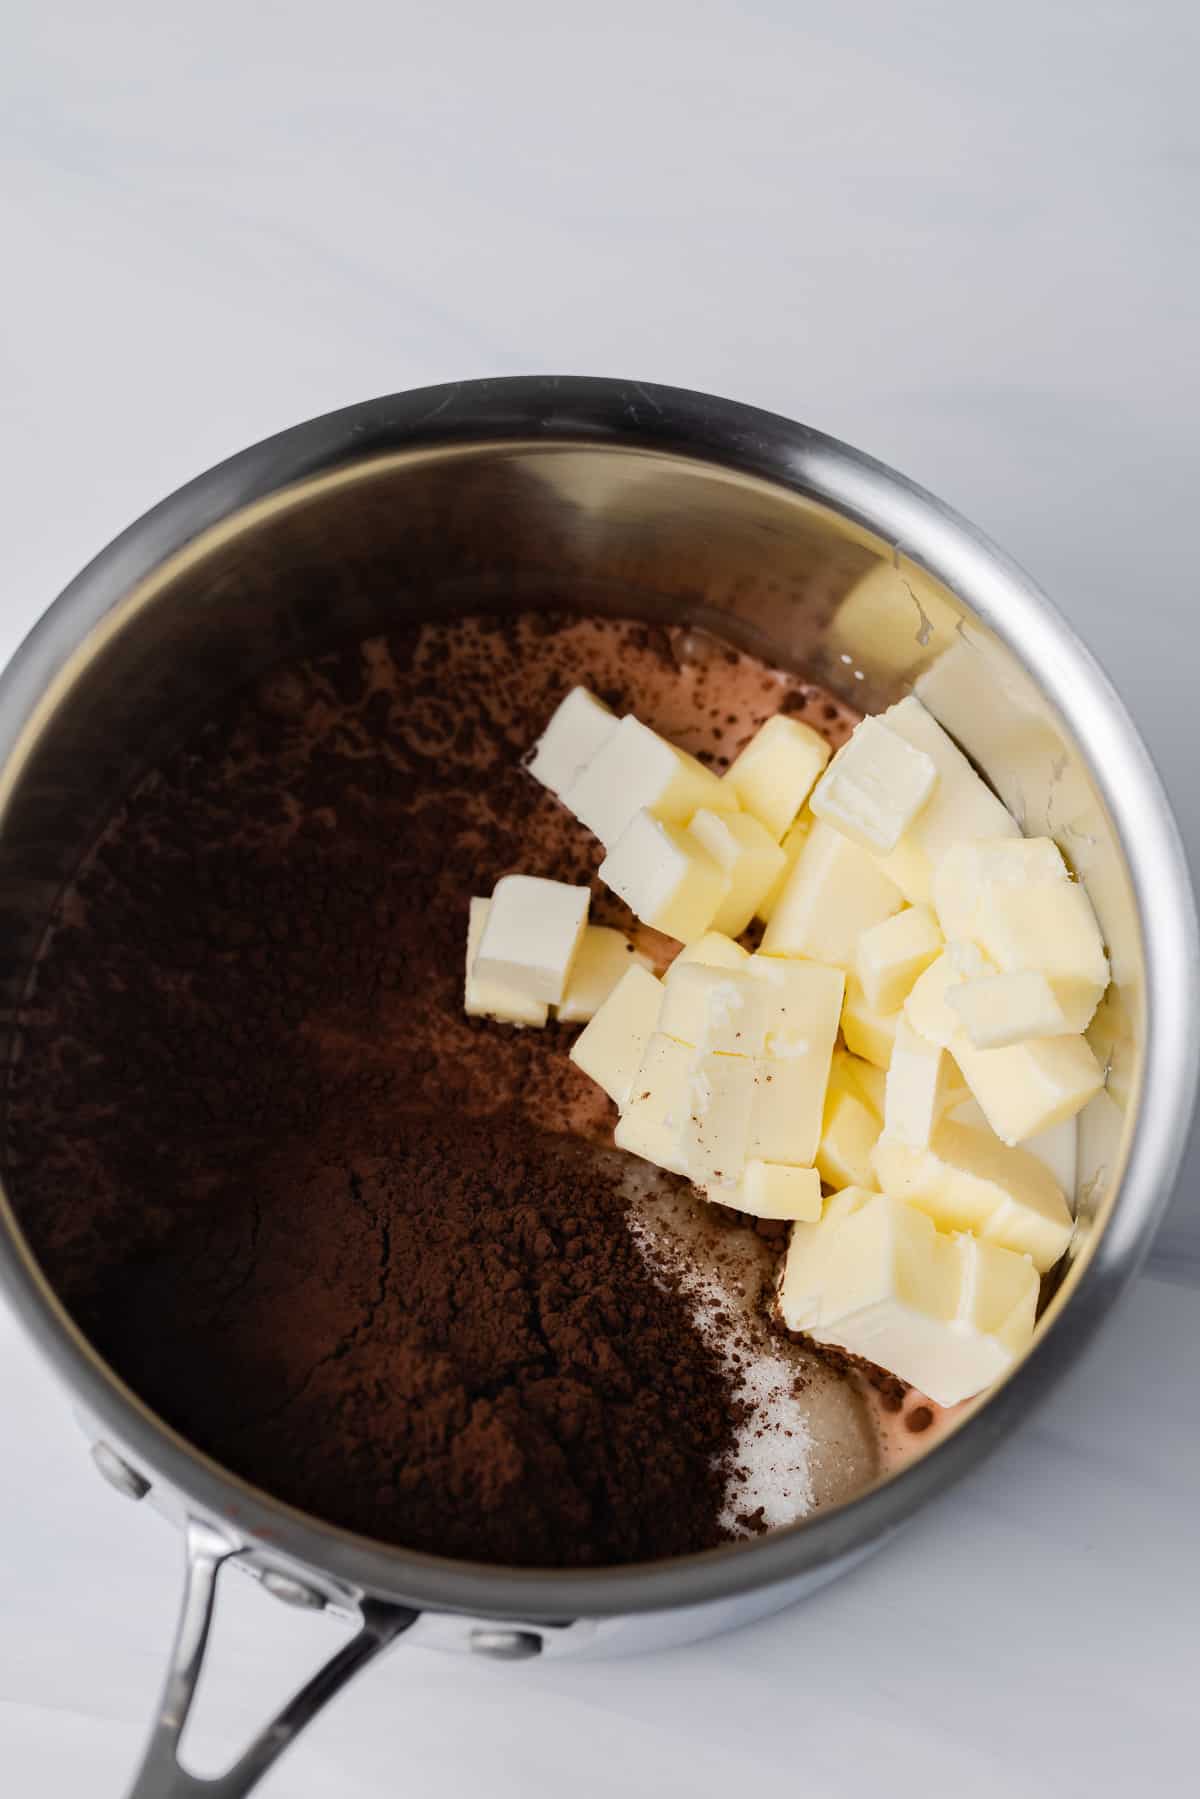 Pot with sugar, milk, butter, and cocoa powder.